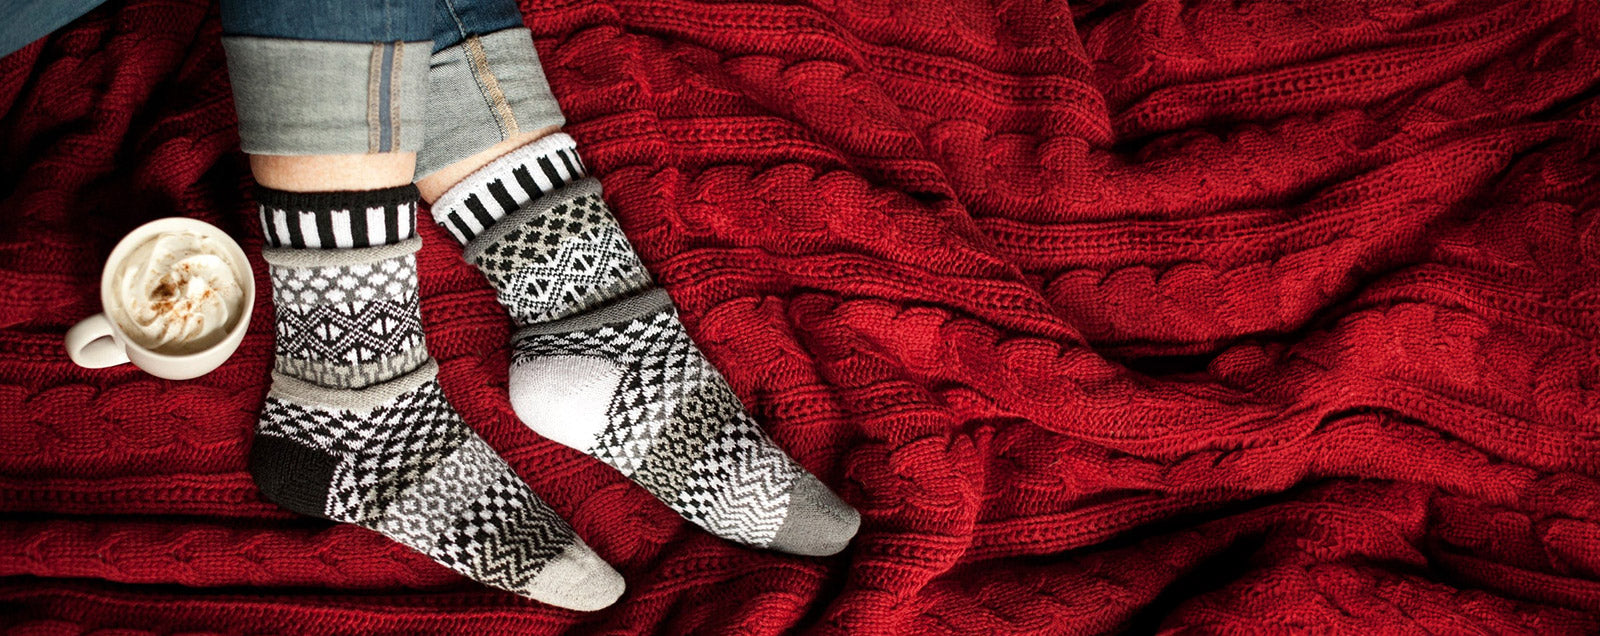 A person wears warm, cozy socks with a black, white and gray pattern while snuggling on a red cable-knit blanket and drinking cocoa.